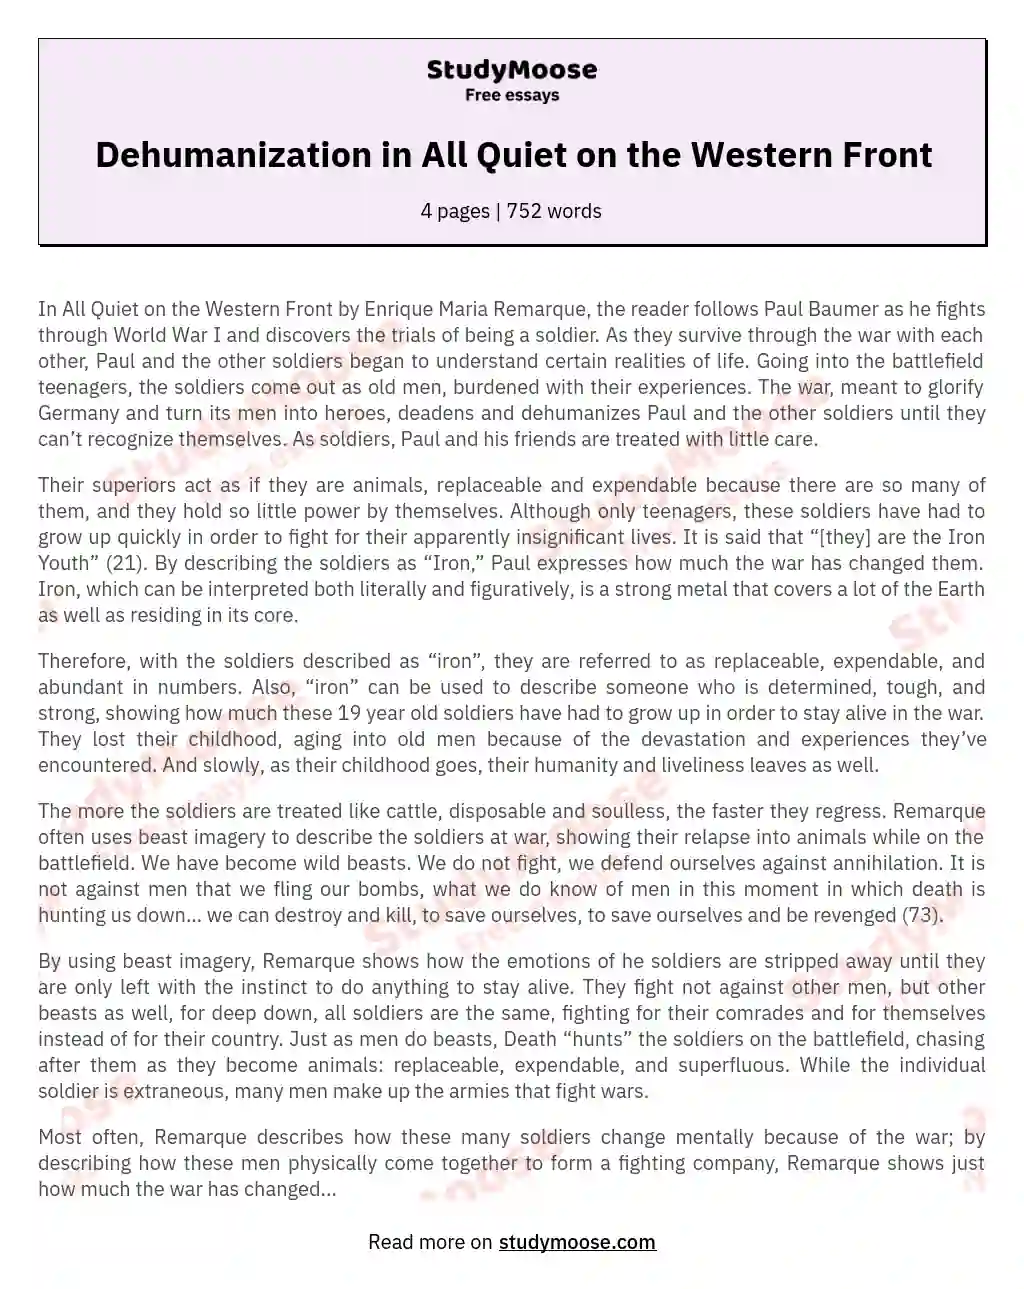 Dehumanization in All Quiet on the Western Front